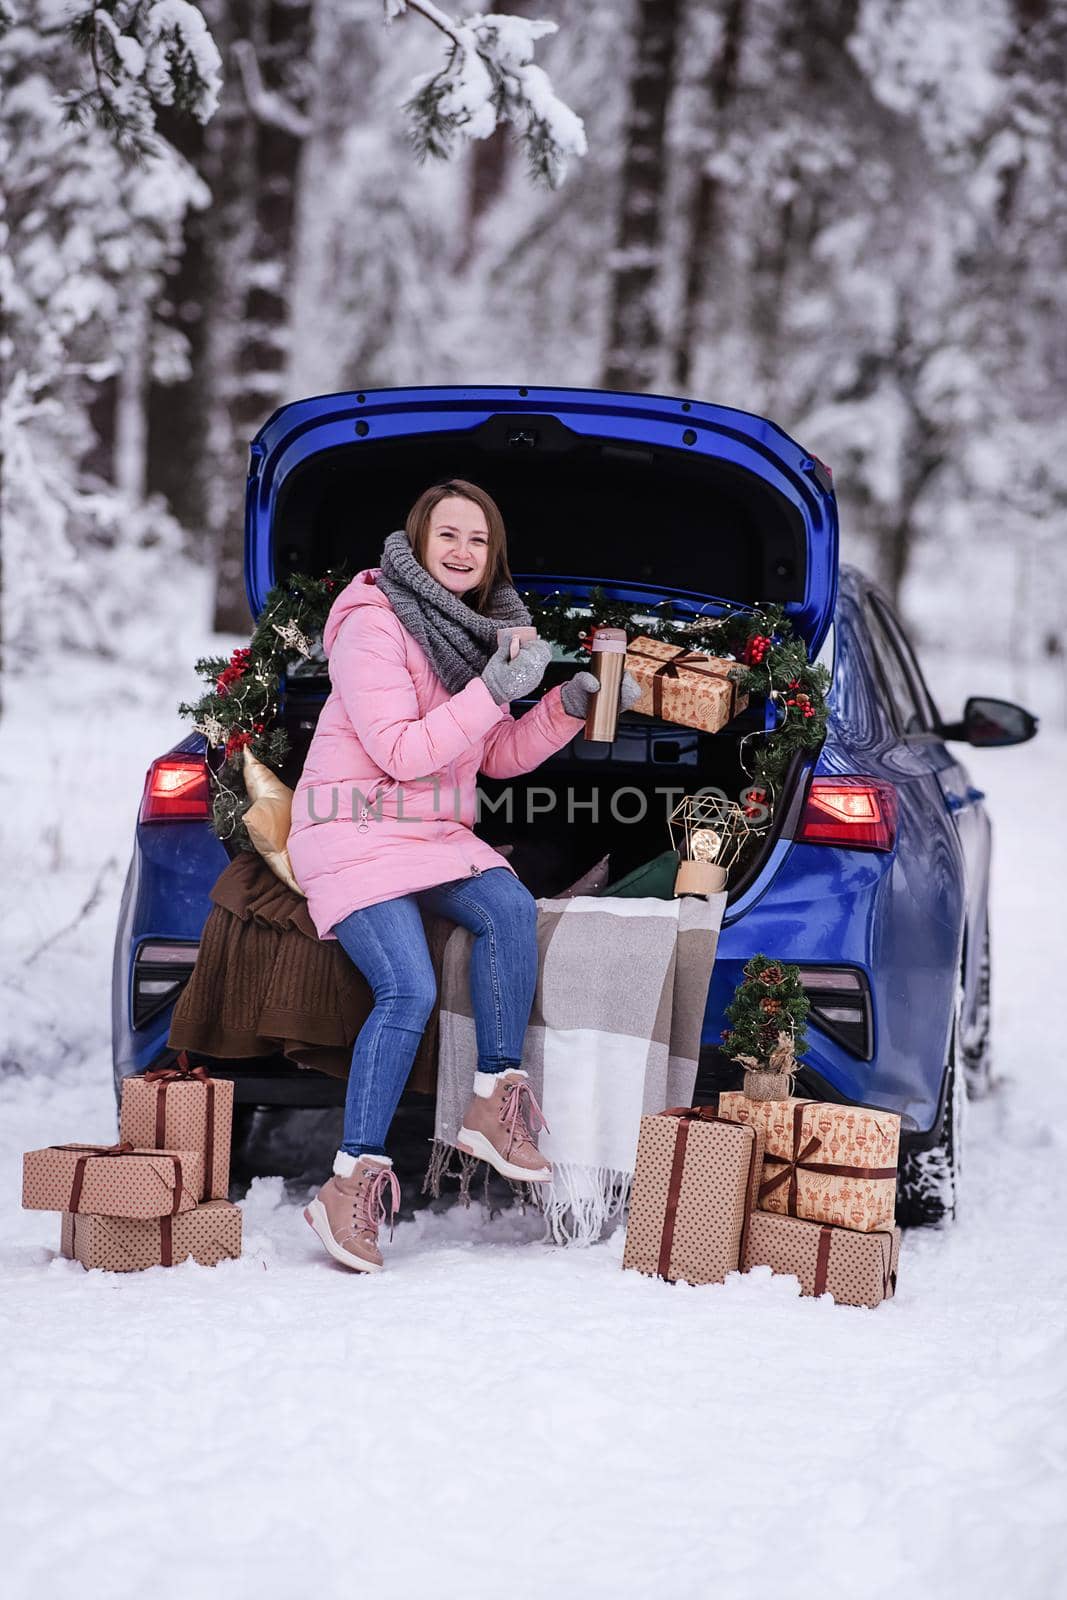 A woman in winter clothes drinks a hot drink sitting in a car decorated in a New Year's way. Traveling by car through the forest. A trip before Christmas.